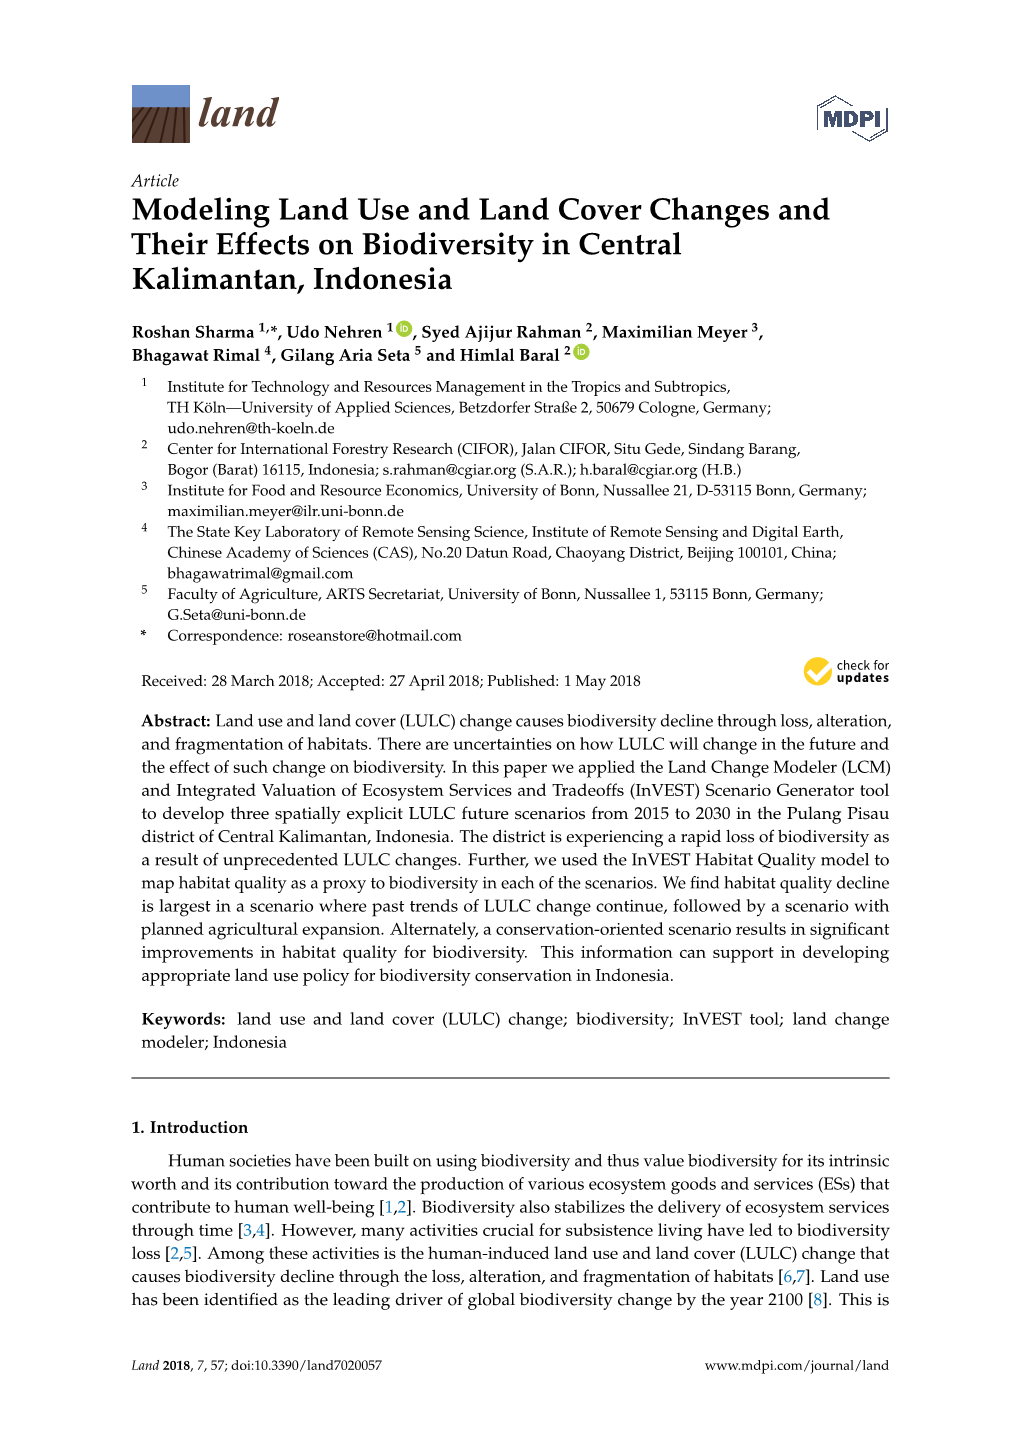 Modeling Land Use and Land Cover Changes and Their Effects on Biodiversity in Central Kalimantan, Indonesia